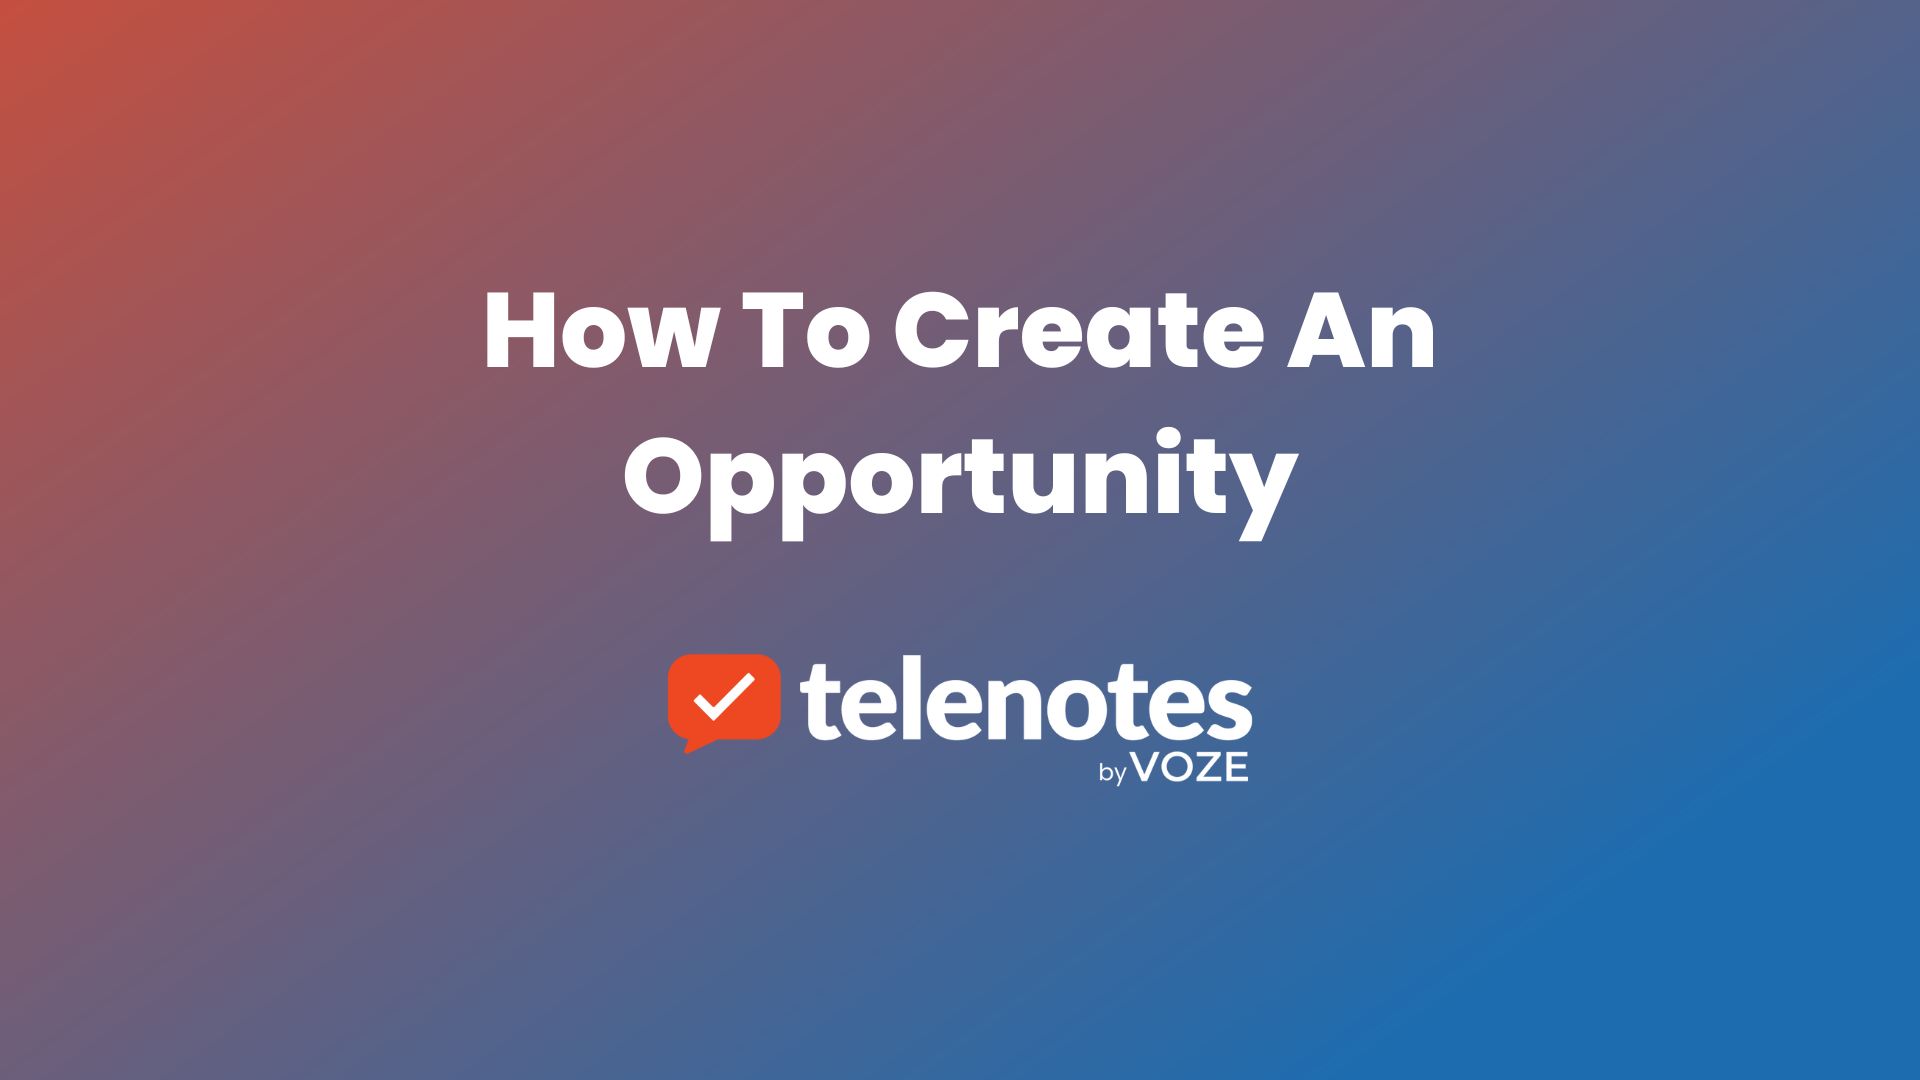 How To Create An Opportunity